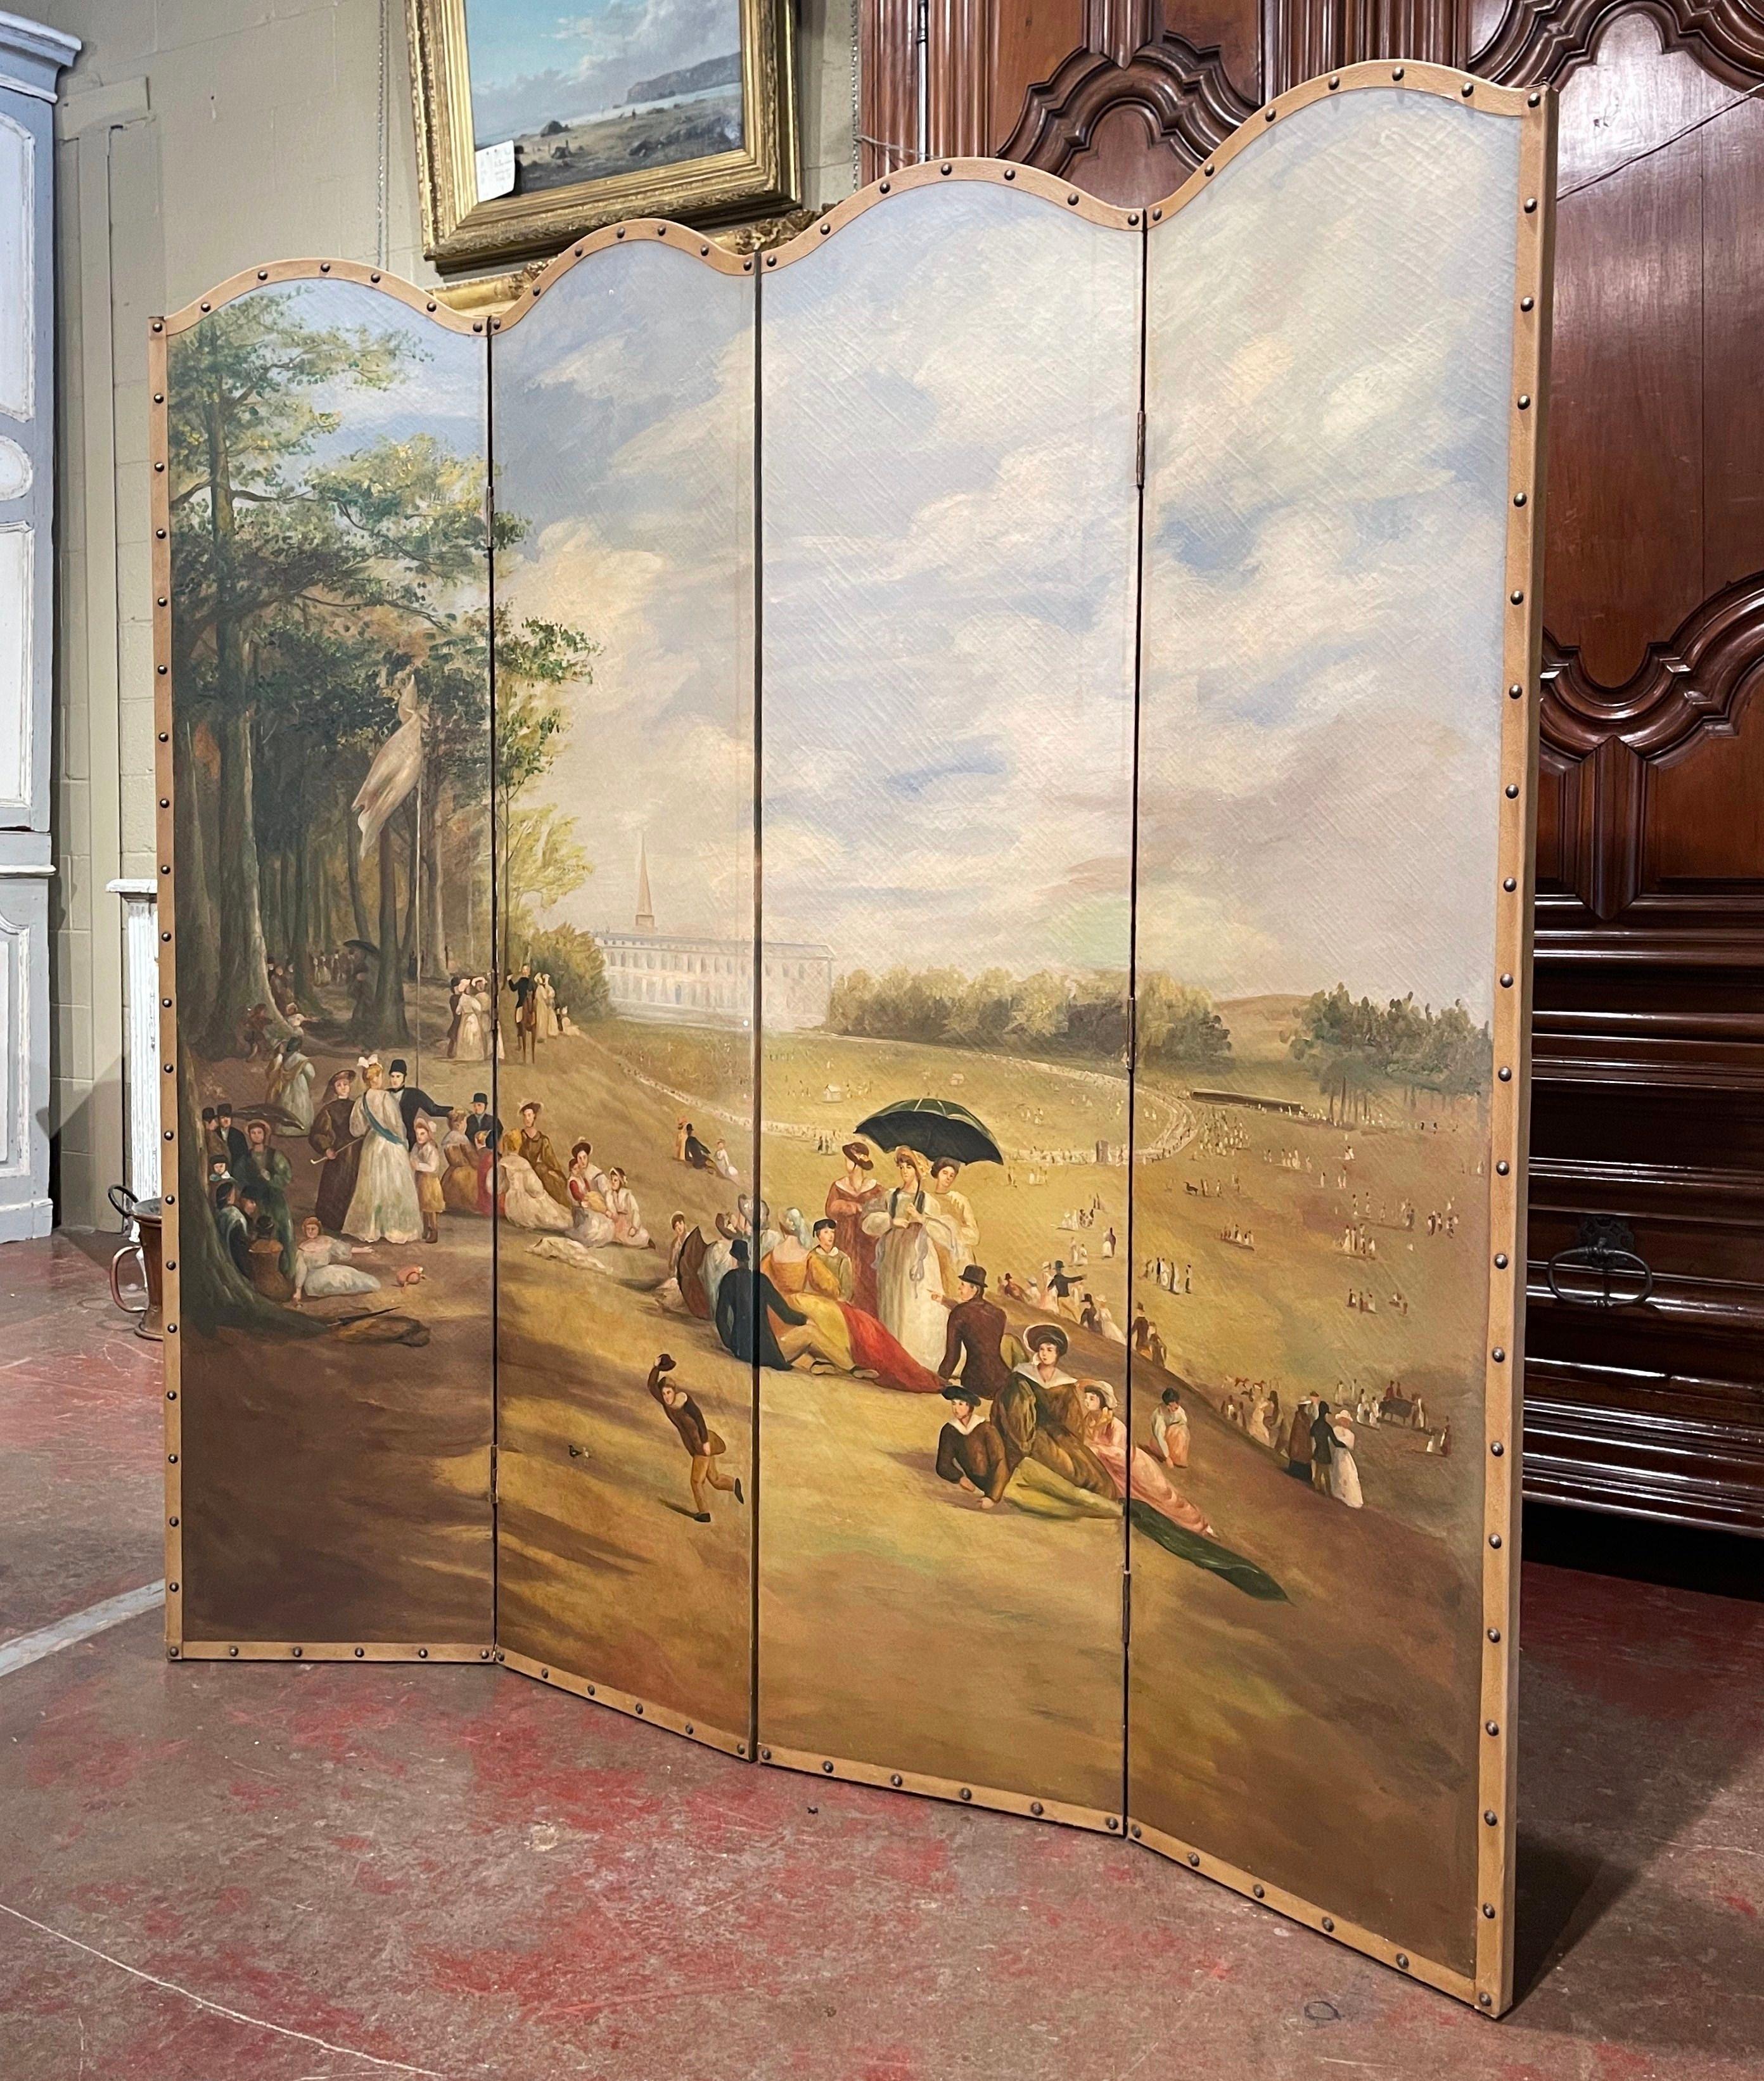 Decorate a dining or living room with this elegant and colorful vintage screen. Crafted in France circa 1970, the art work with decorative arched top, depicts an outdoor garden scene on a sunny day, with figures gathering in a verdant park landscape